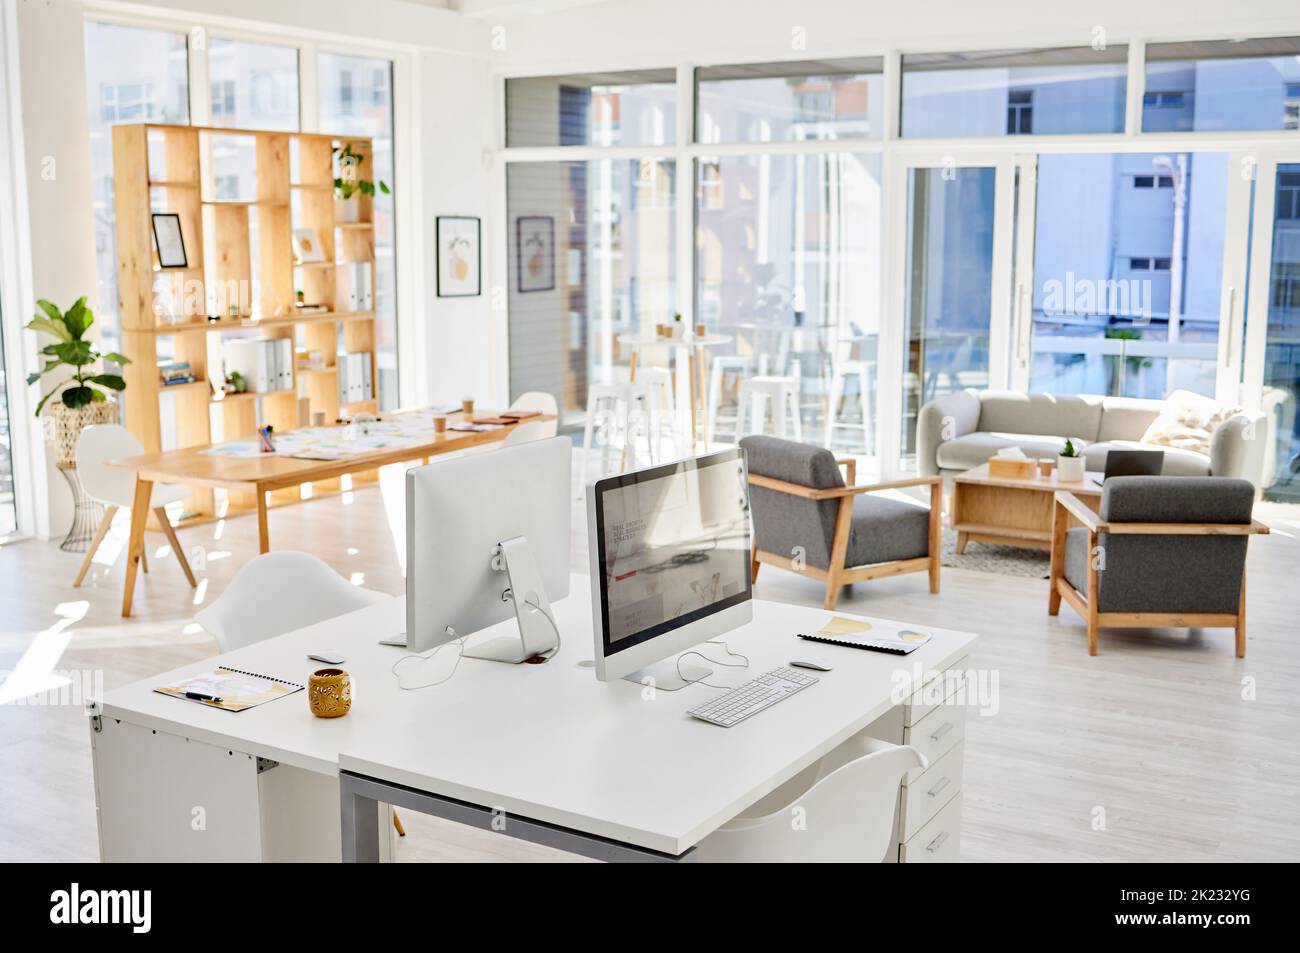 Empty office room, workplace or interior with an arranged desk, computers and furniture. Corporate organized work space, business company working area Stock Photo